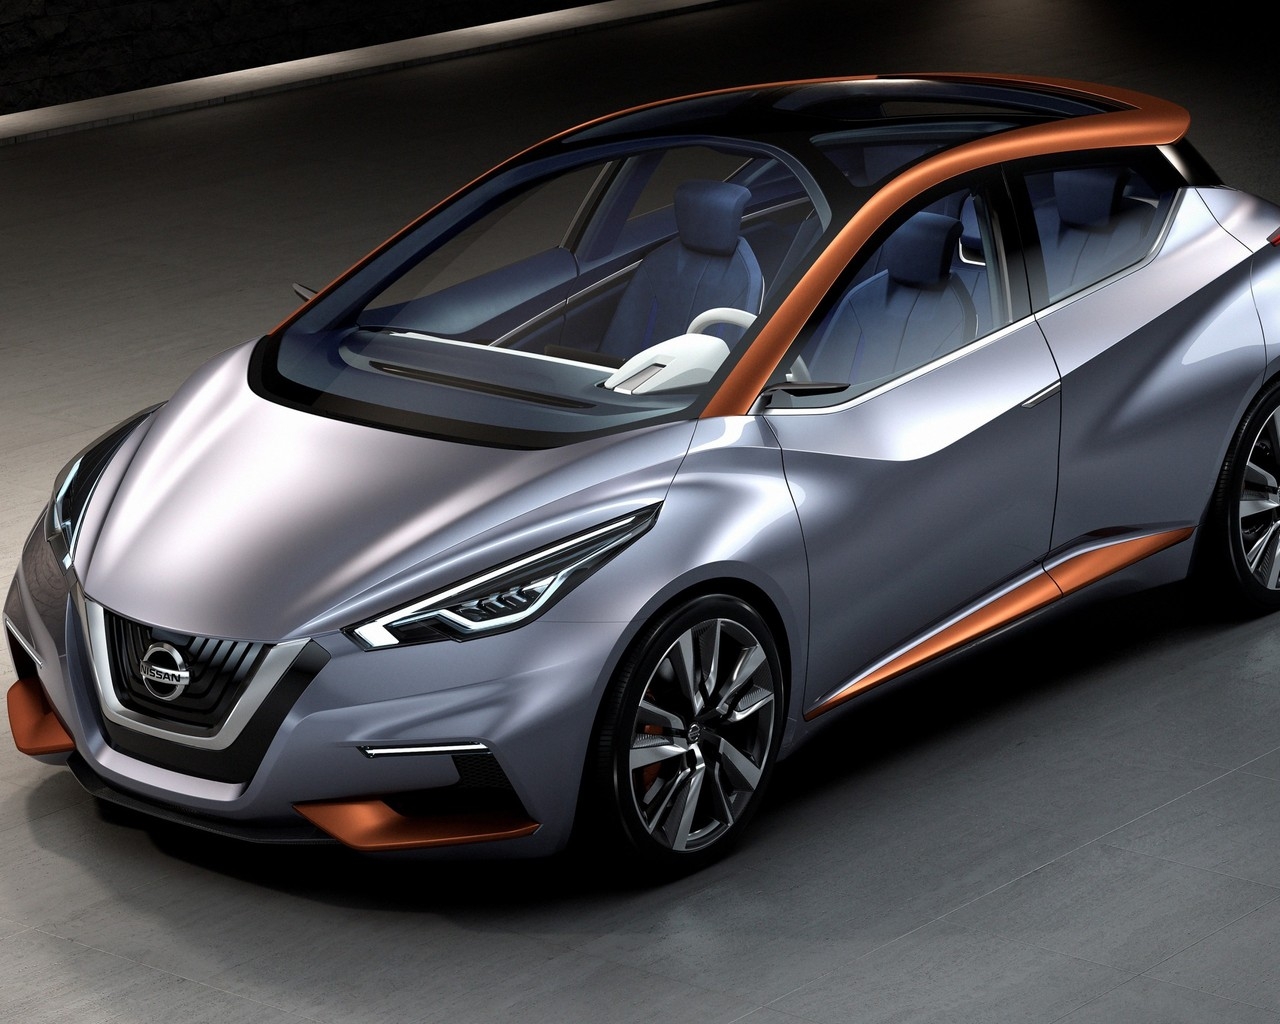 2015 Nissan Sway Concept for 1280 x 1024 resolution